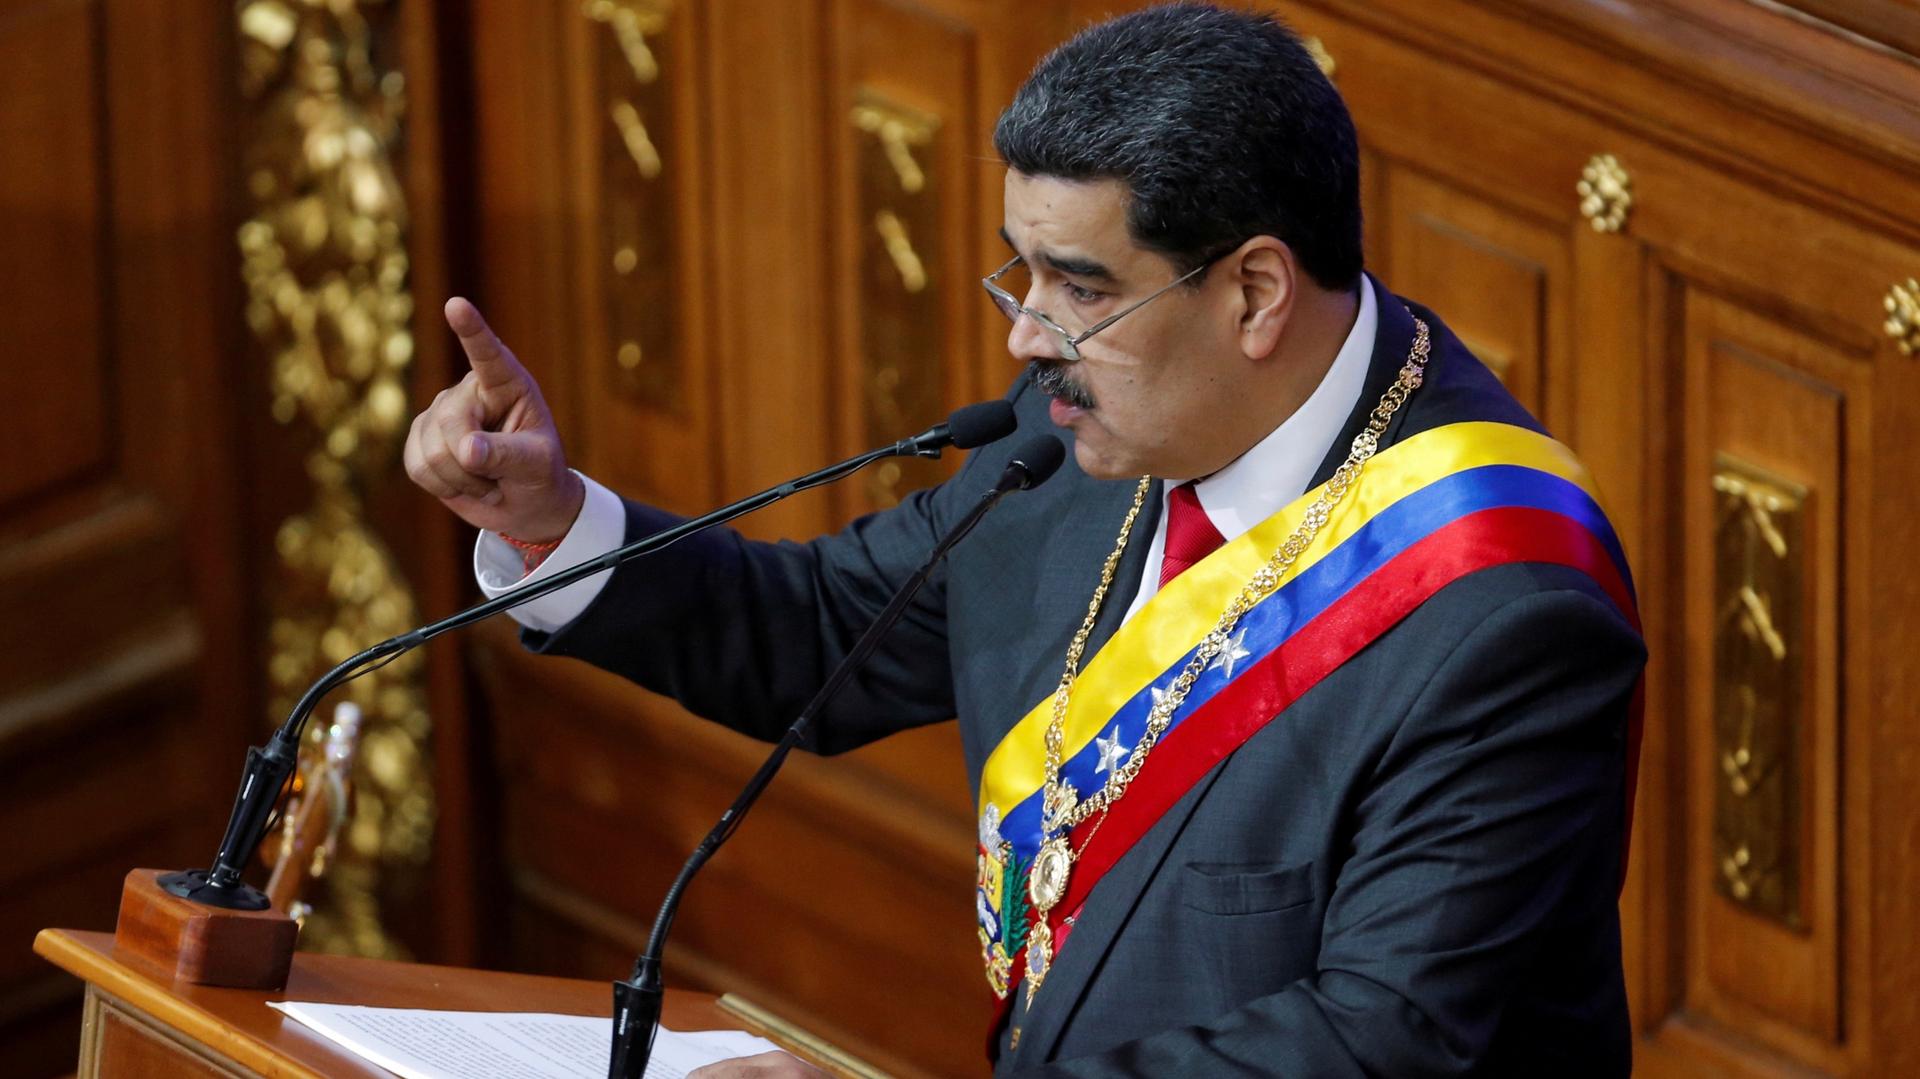 Venezuela's disputed President Nicolas Maduro gestures as he speaks during a special session of the National Constituent Assembly to deliver his annual state of the nation speech, in Caracas, Venezuela, Jan. 14, 2020. 